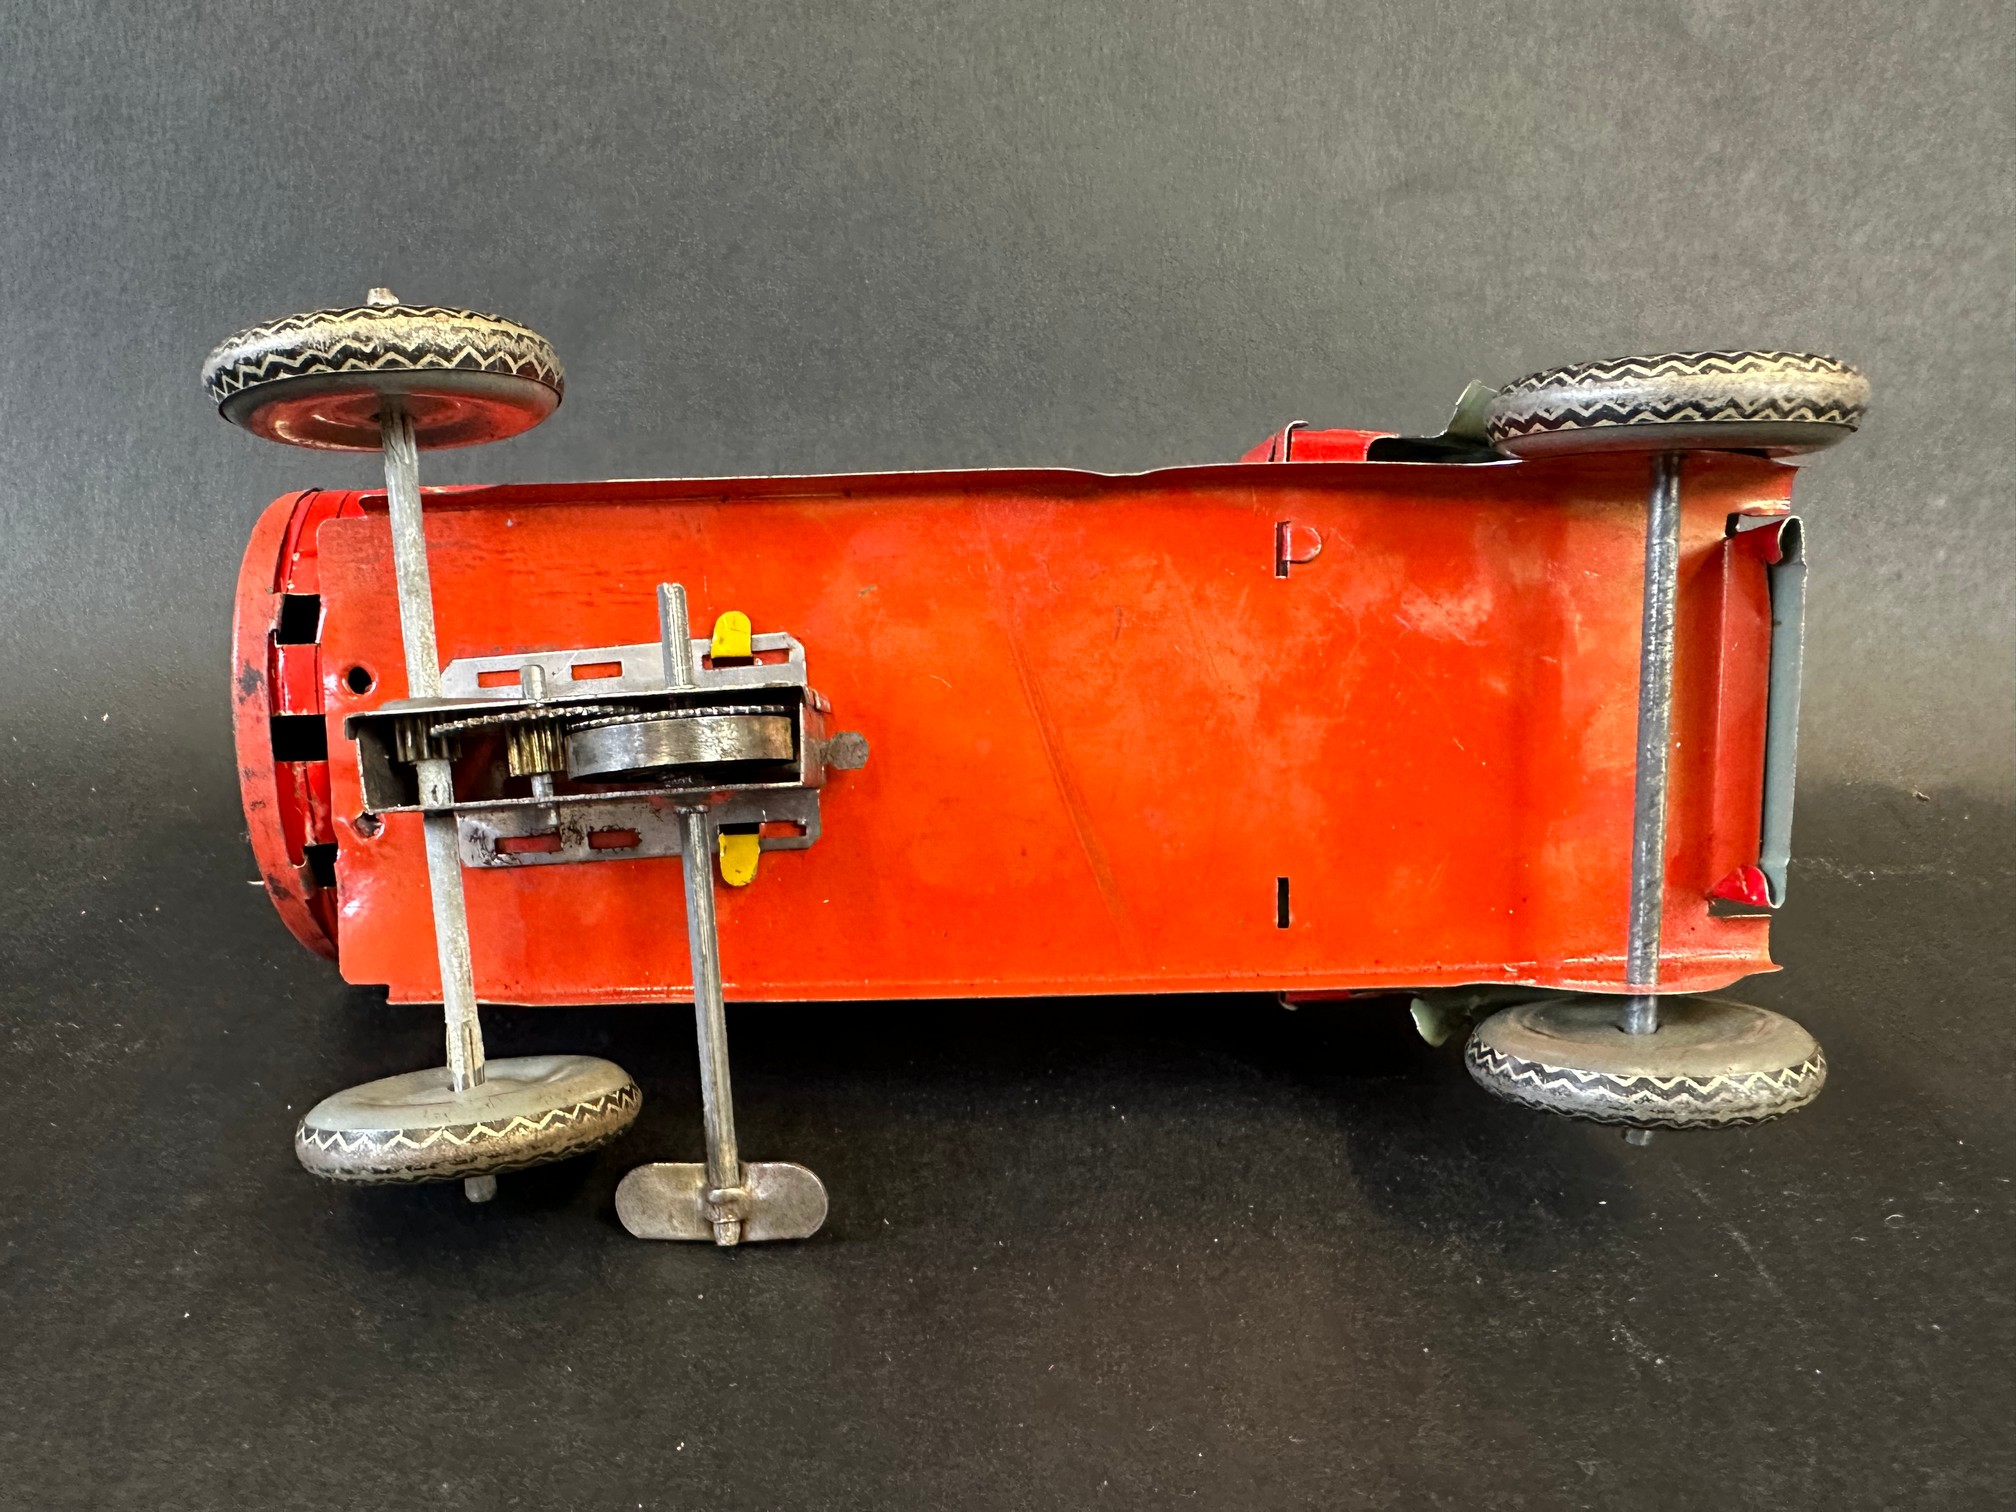 A Mettoy clockwork tinplate model of an Esso petrol tanker. - Image 5 of 5